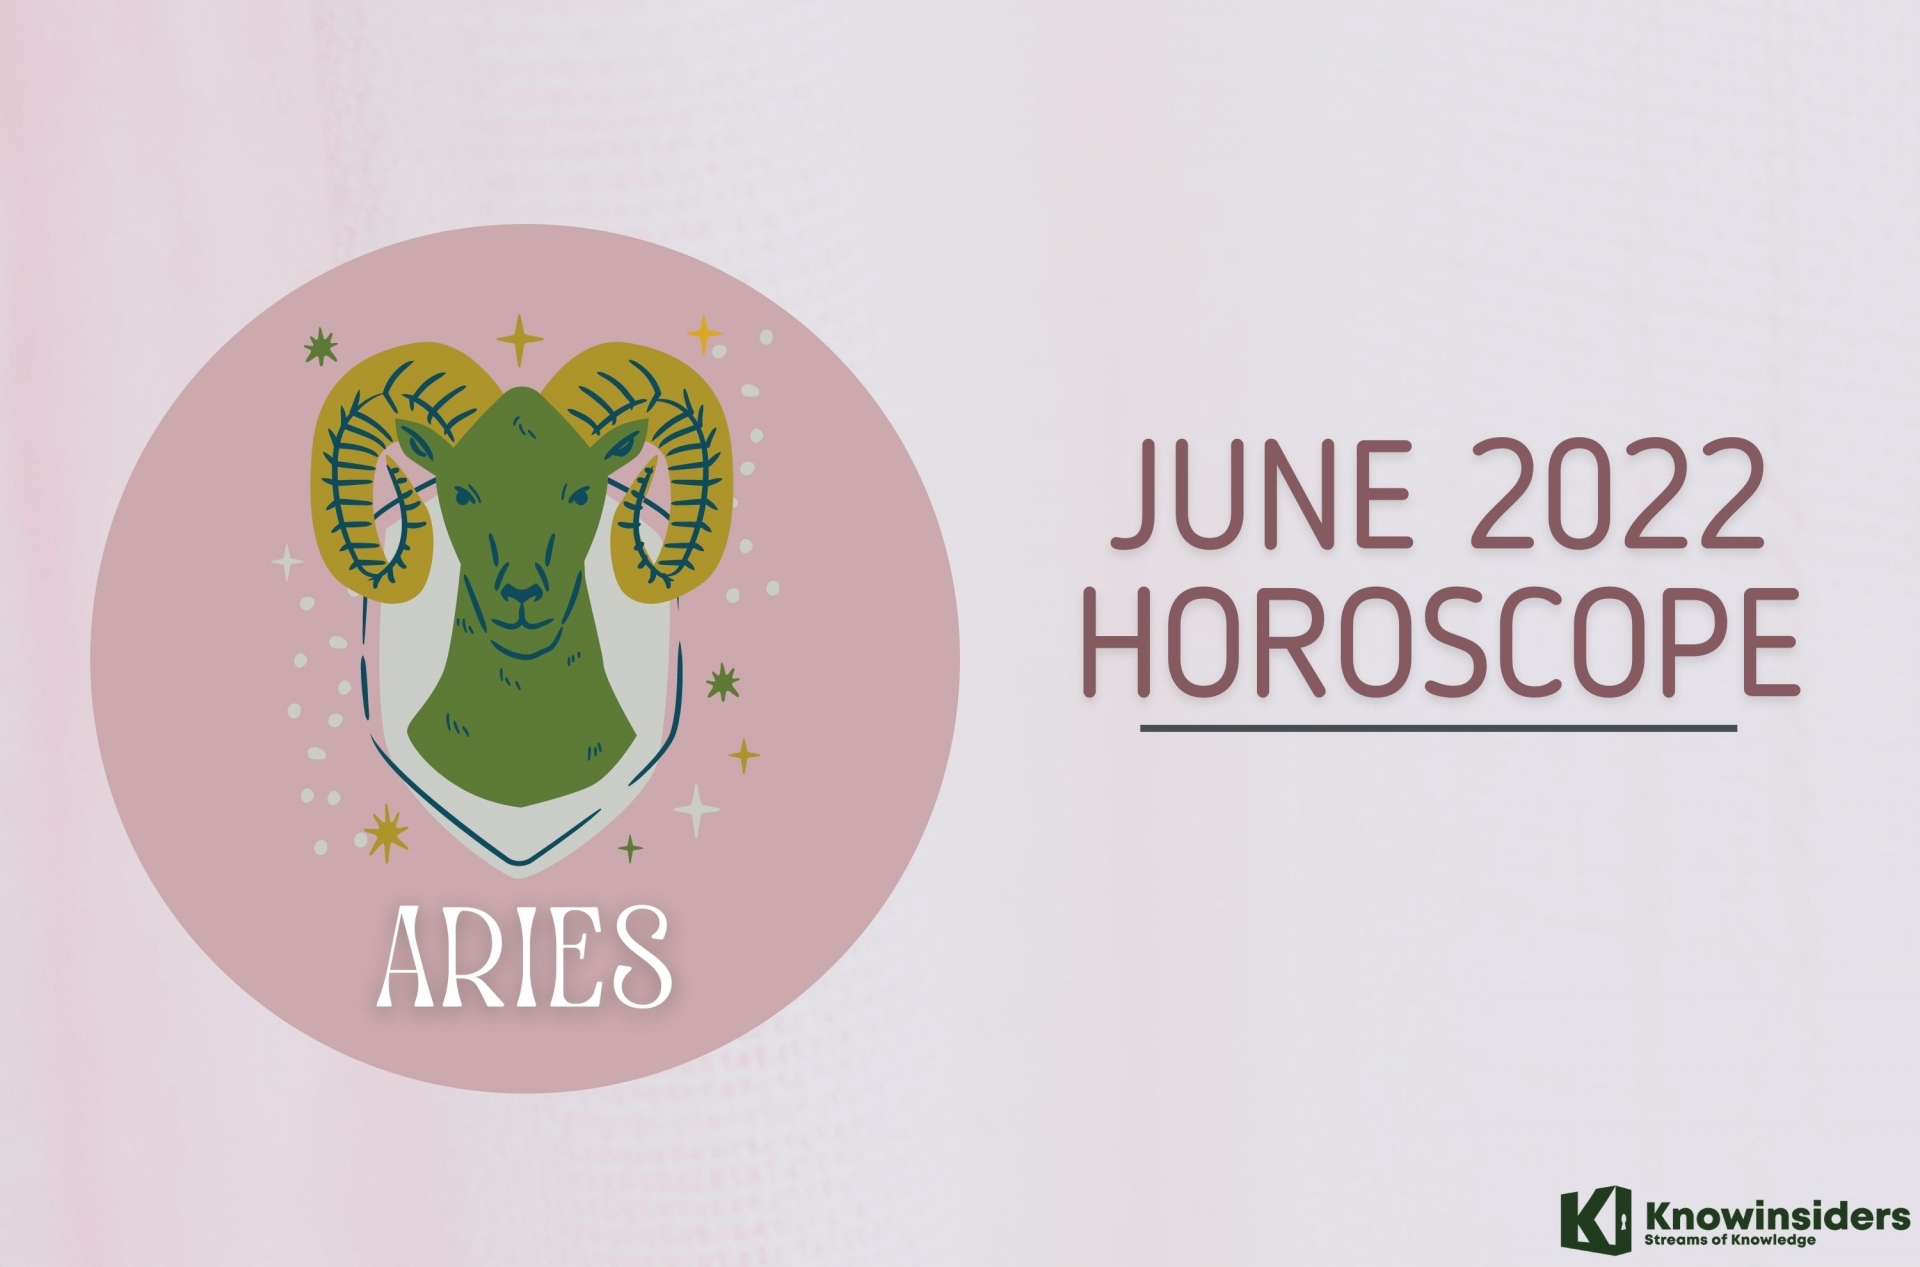 ARIES June 2022 Horoscope: Monthly Prediction for Love, Career, Money and Health